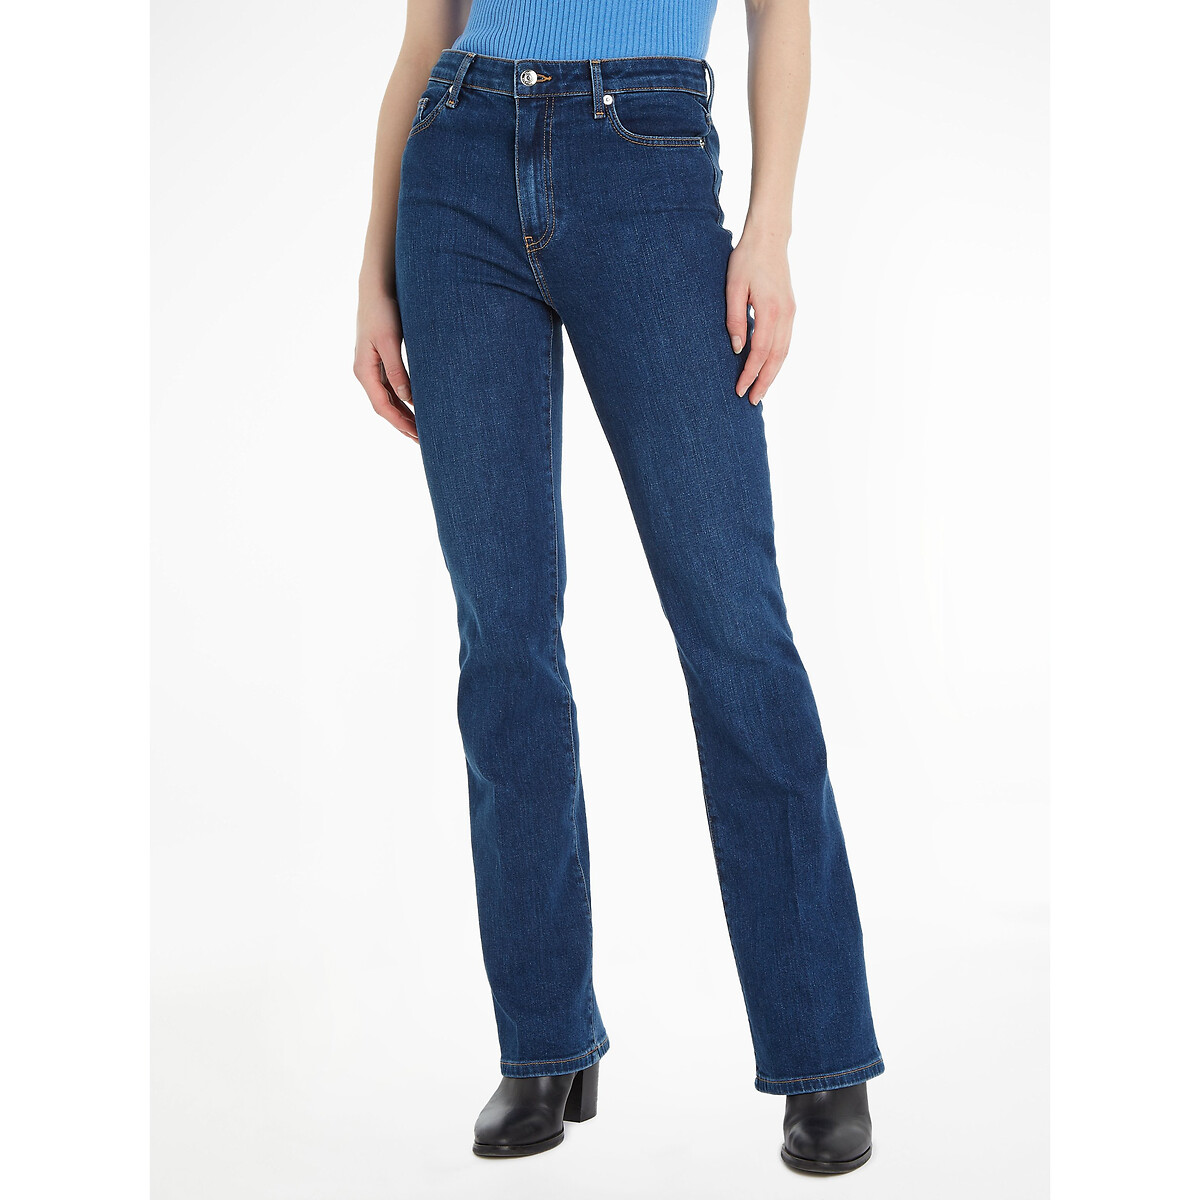 Image of High Waist Bootcut Jeans